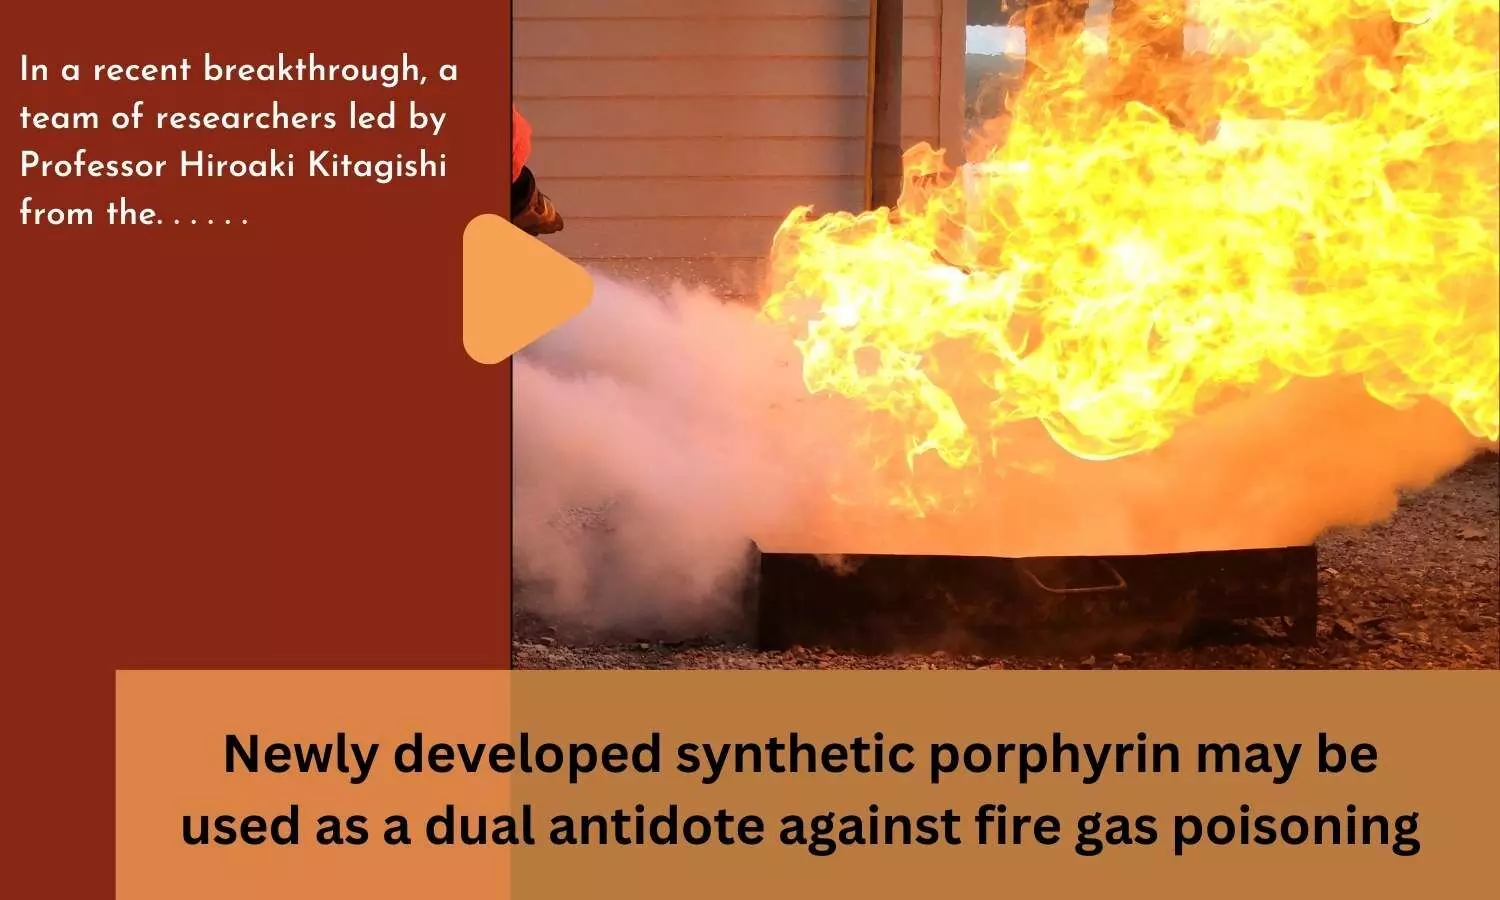 Newly developed synthetic porphyrin may be used as a dual antidote against fire gas poisoning